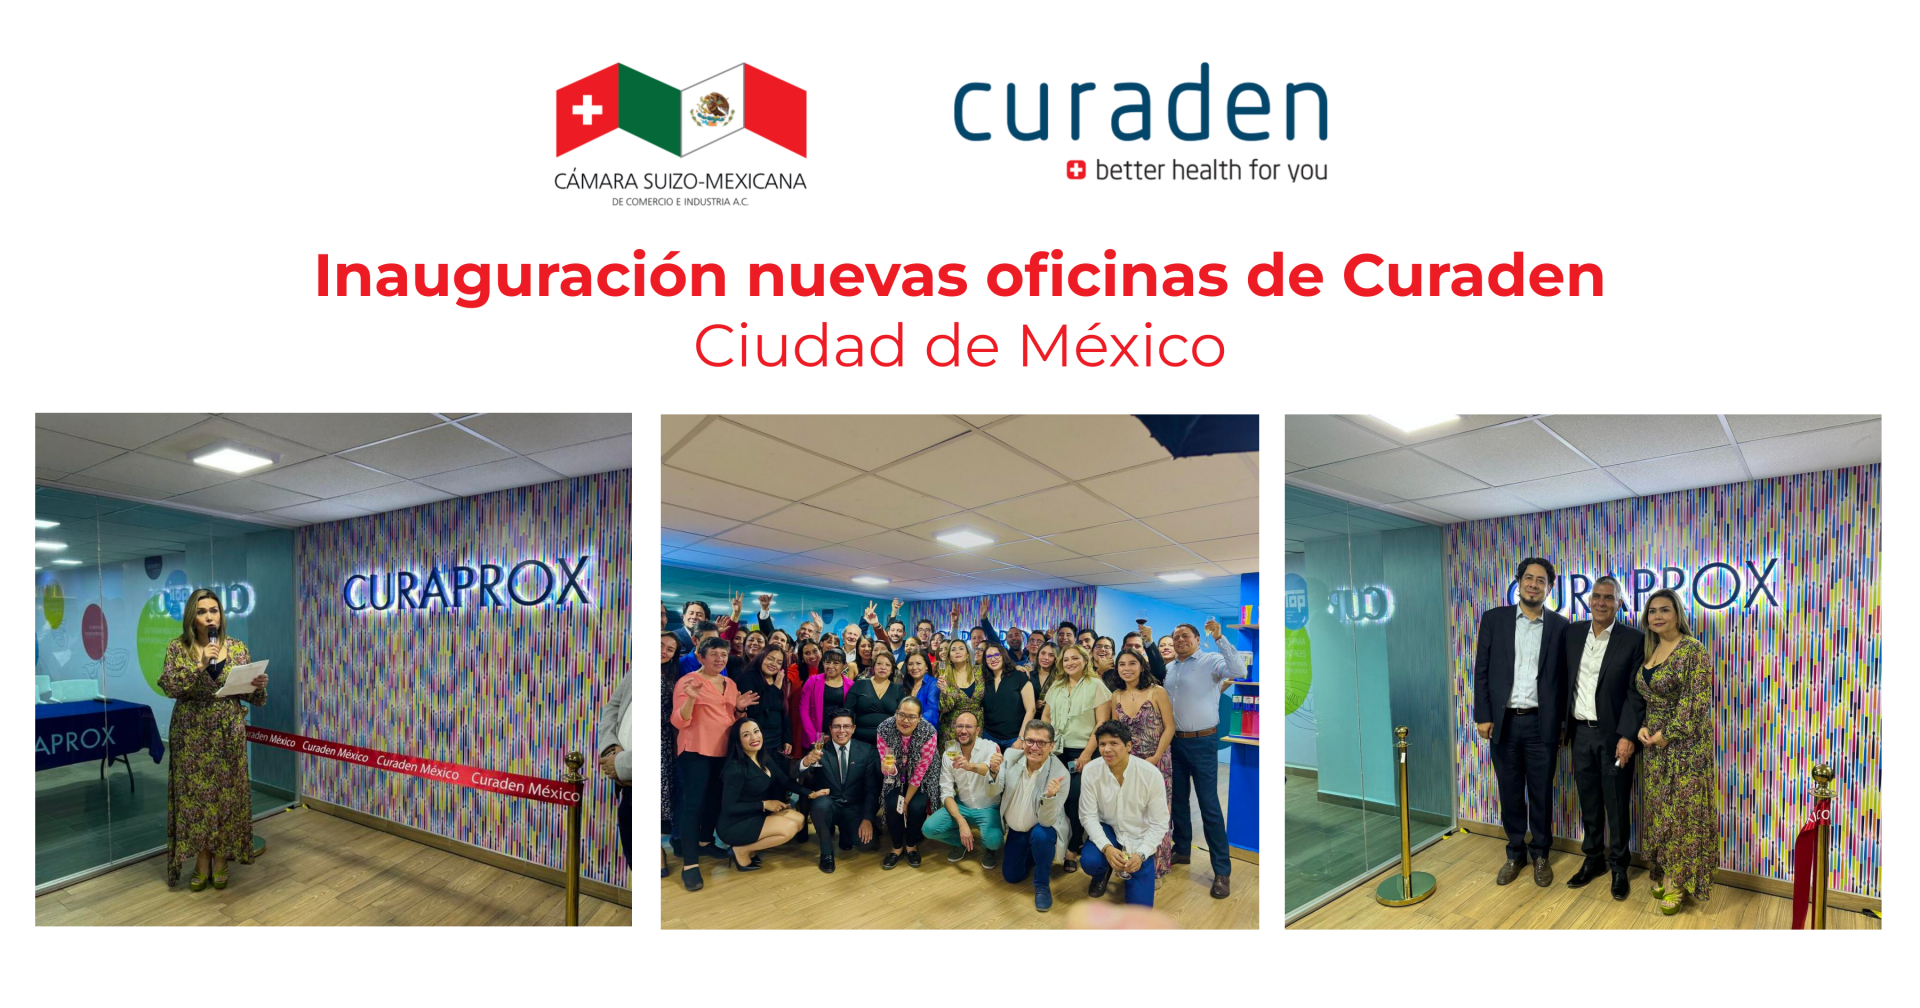 Inauguration of Curaden’s new offices